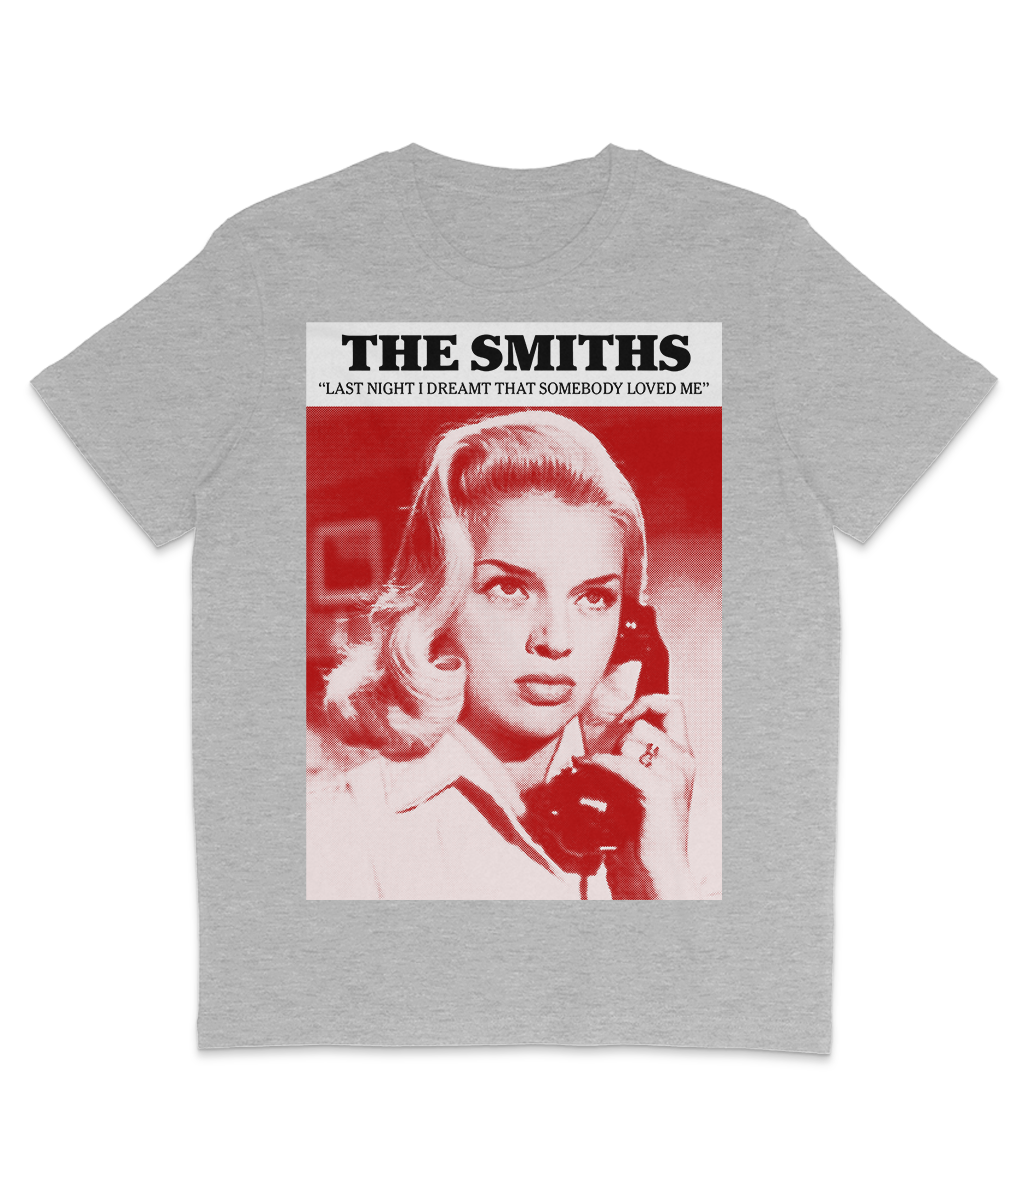 The Smiths - Last Night I Dreamt That Somebody Loved Me - Diana Dors - Red